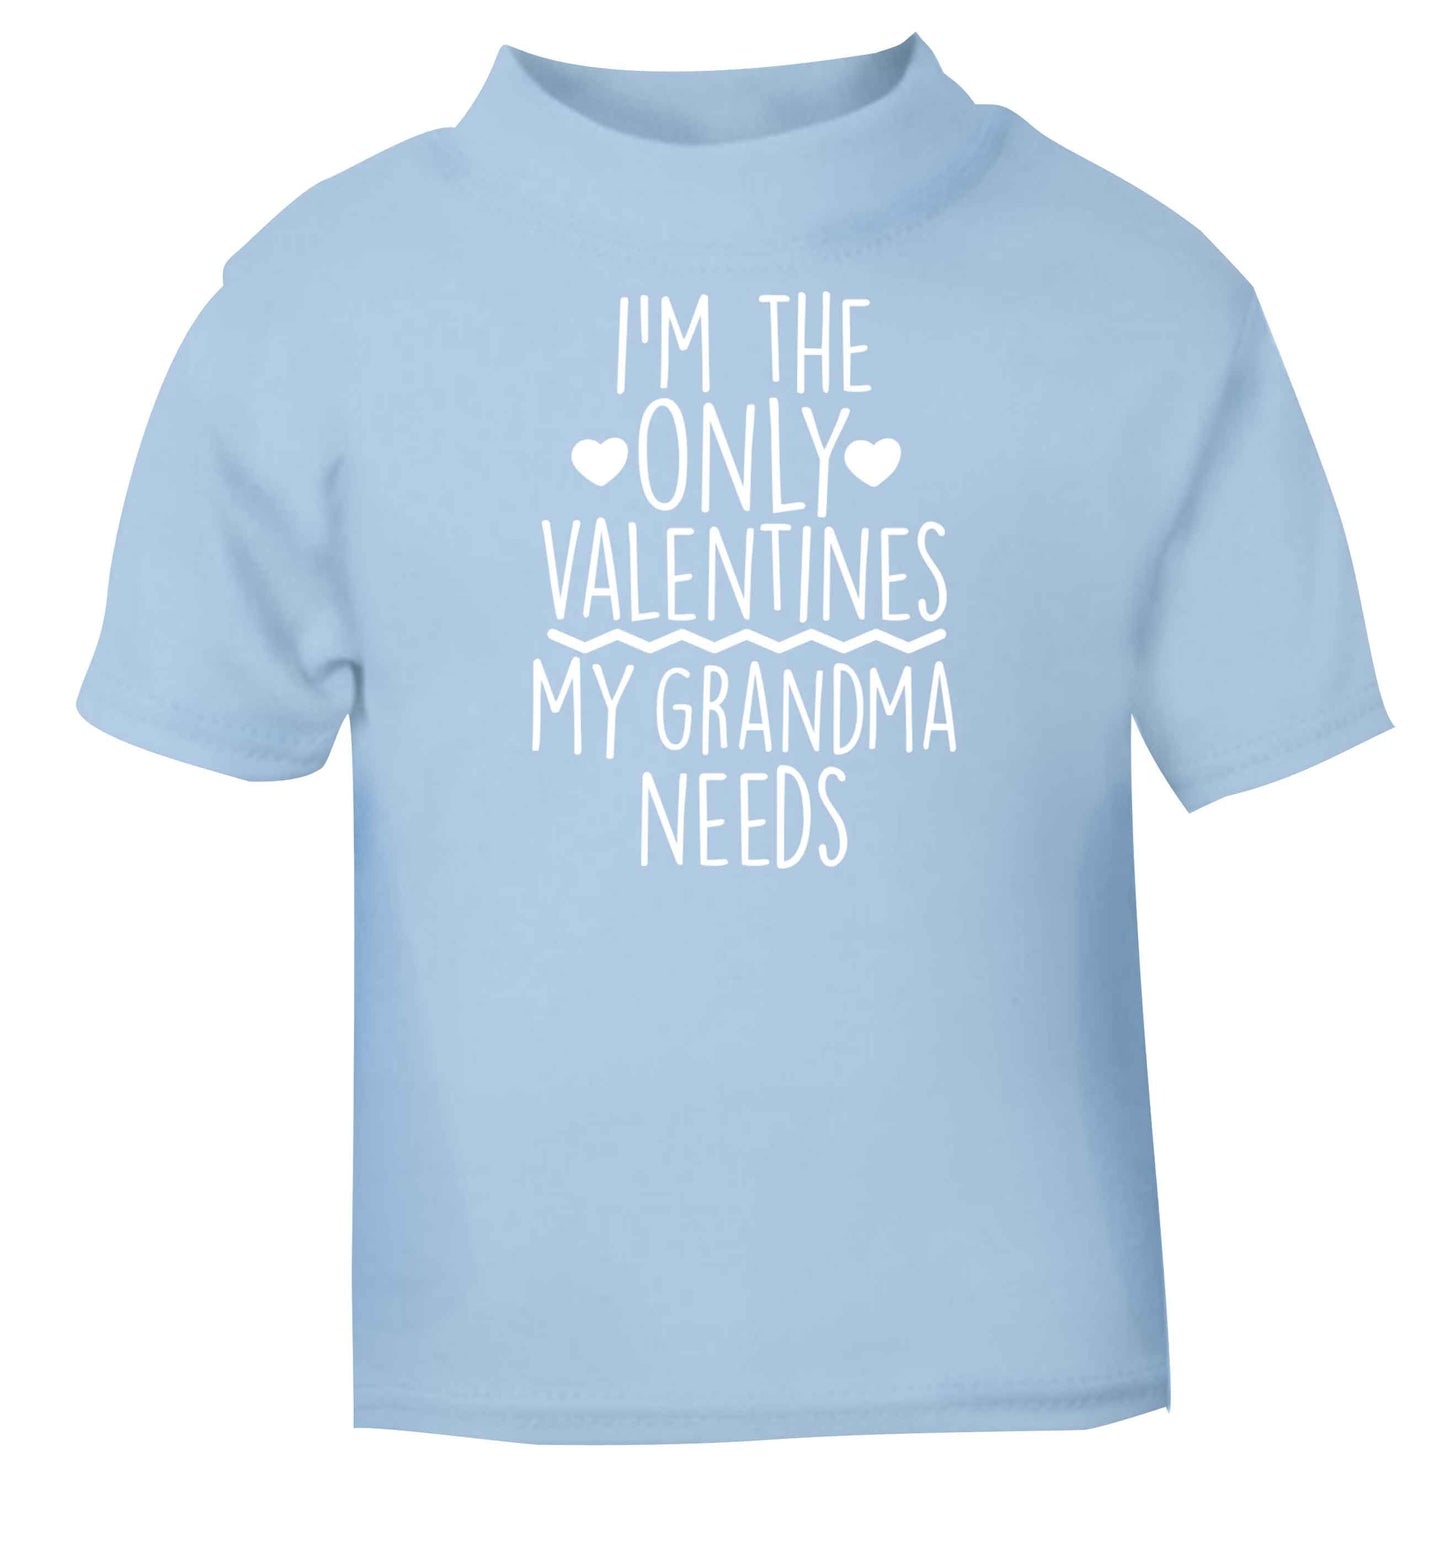 I'm the only valentines my grandma needs light blue baby toddler Tshirt 2 Years